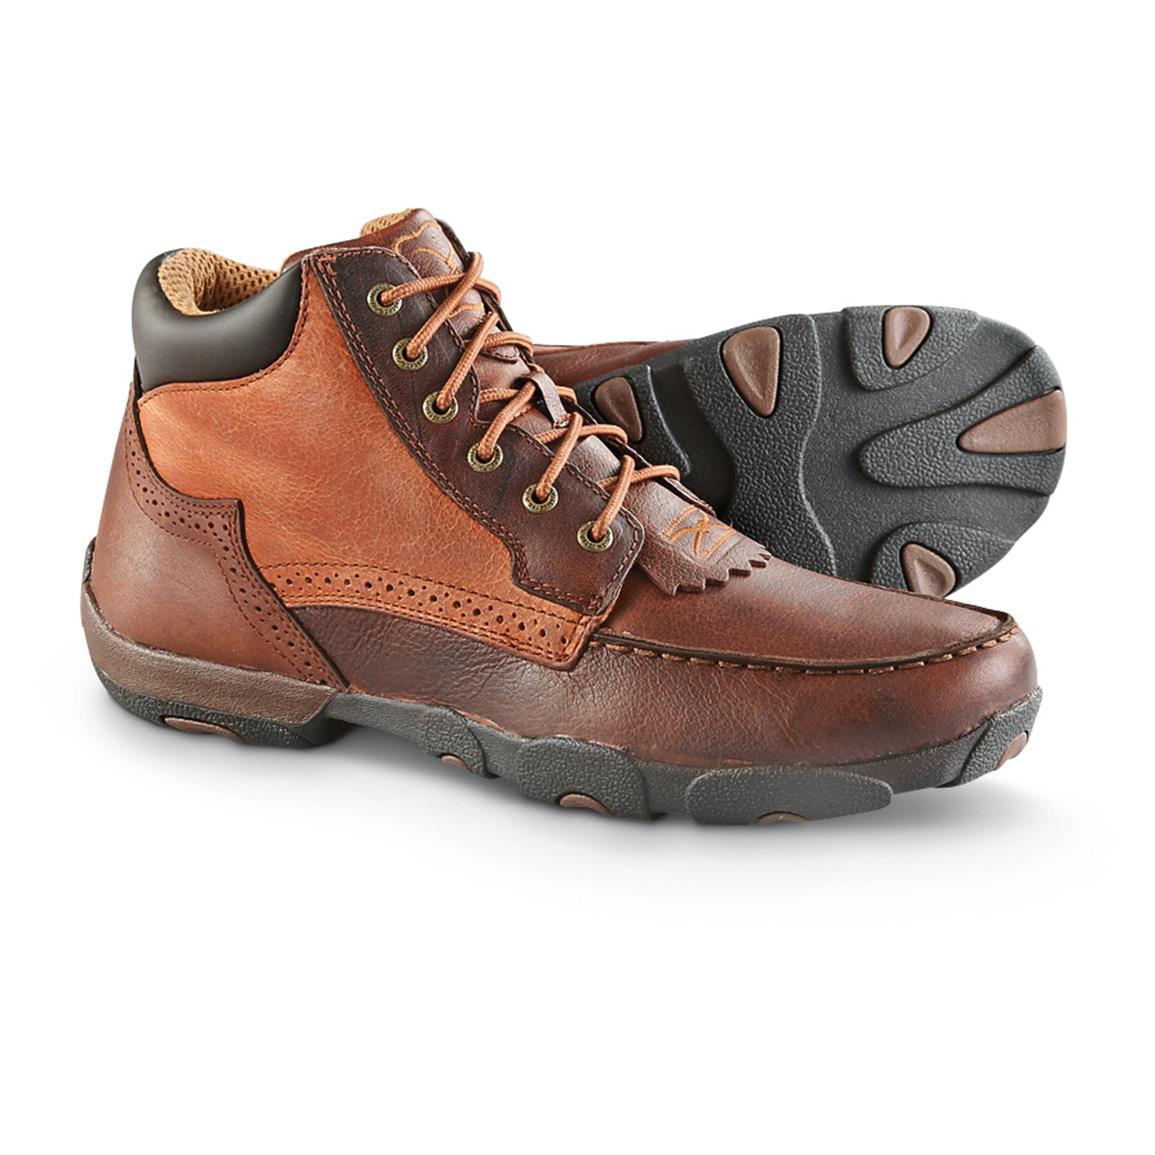 Twisted X Chuck Up Boots - 641050, Casual Shoes at Sportsman's Guide